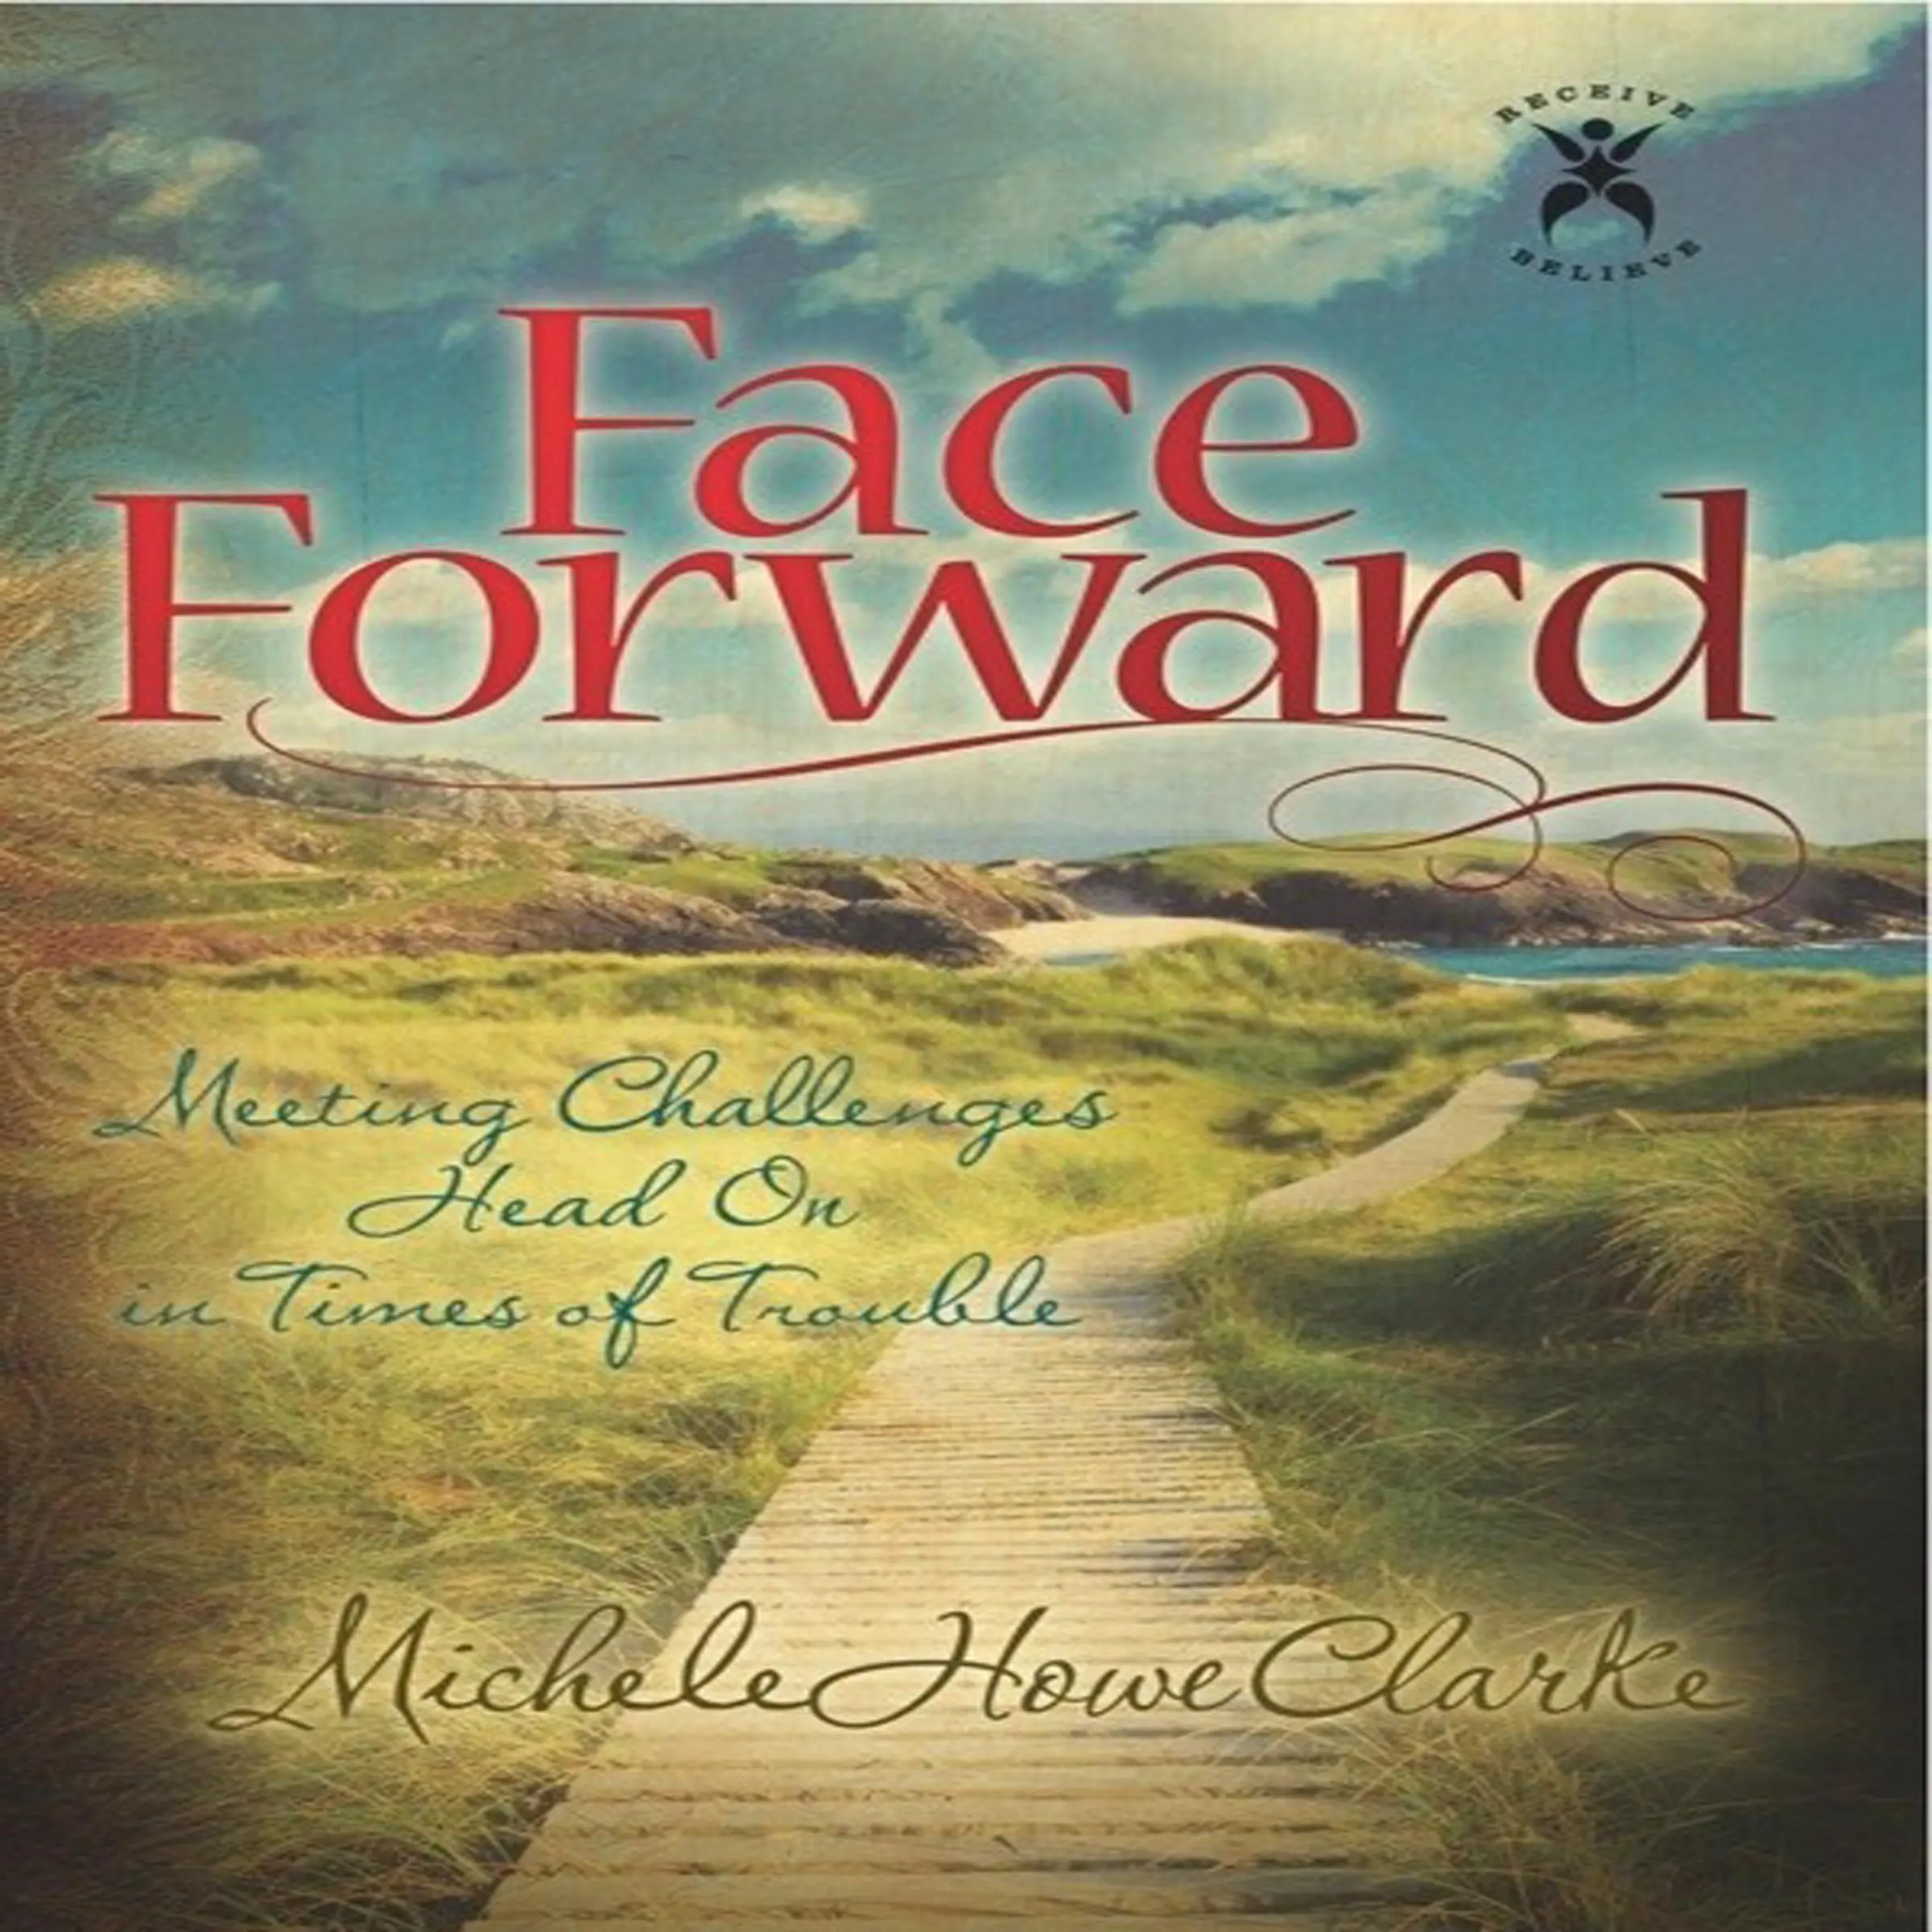 Face Forward Meeting Challenges Head On in Times of Trouble Audiobook by Michele Howe Clarke